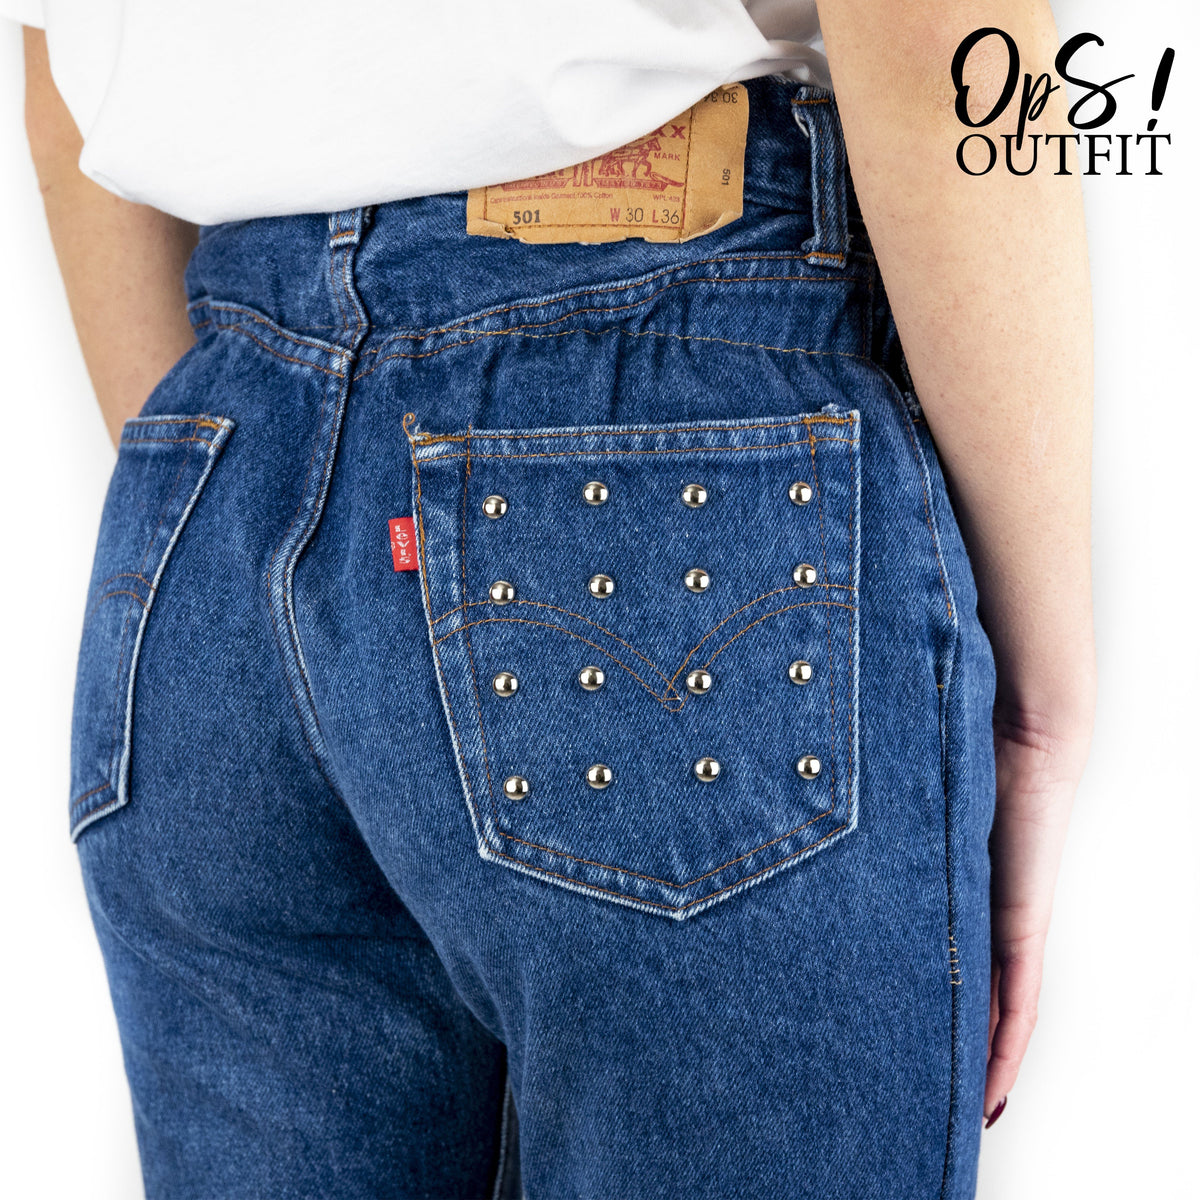 Jeans da donna vintage candy con borchie | OPS OUTFIT – OPS